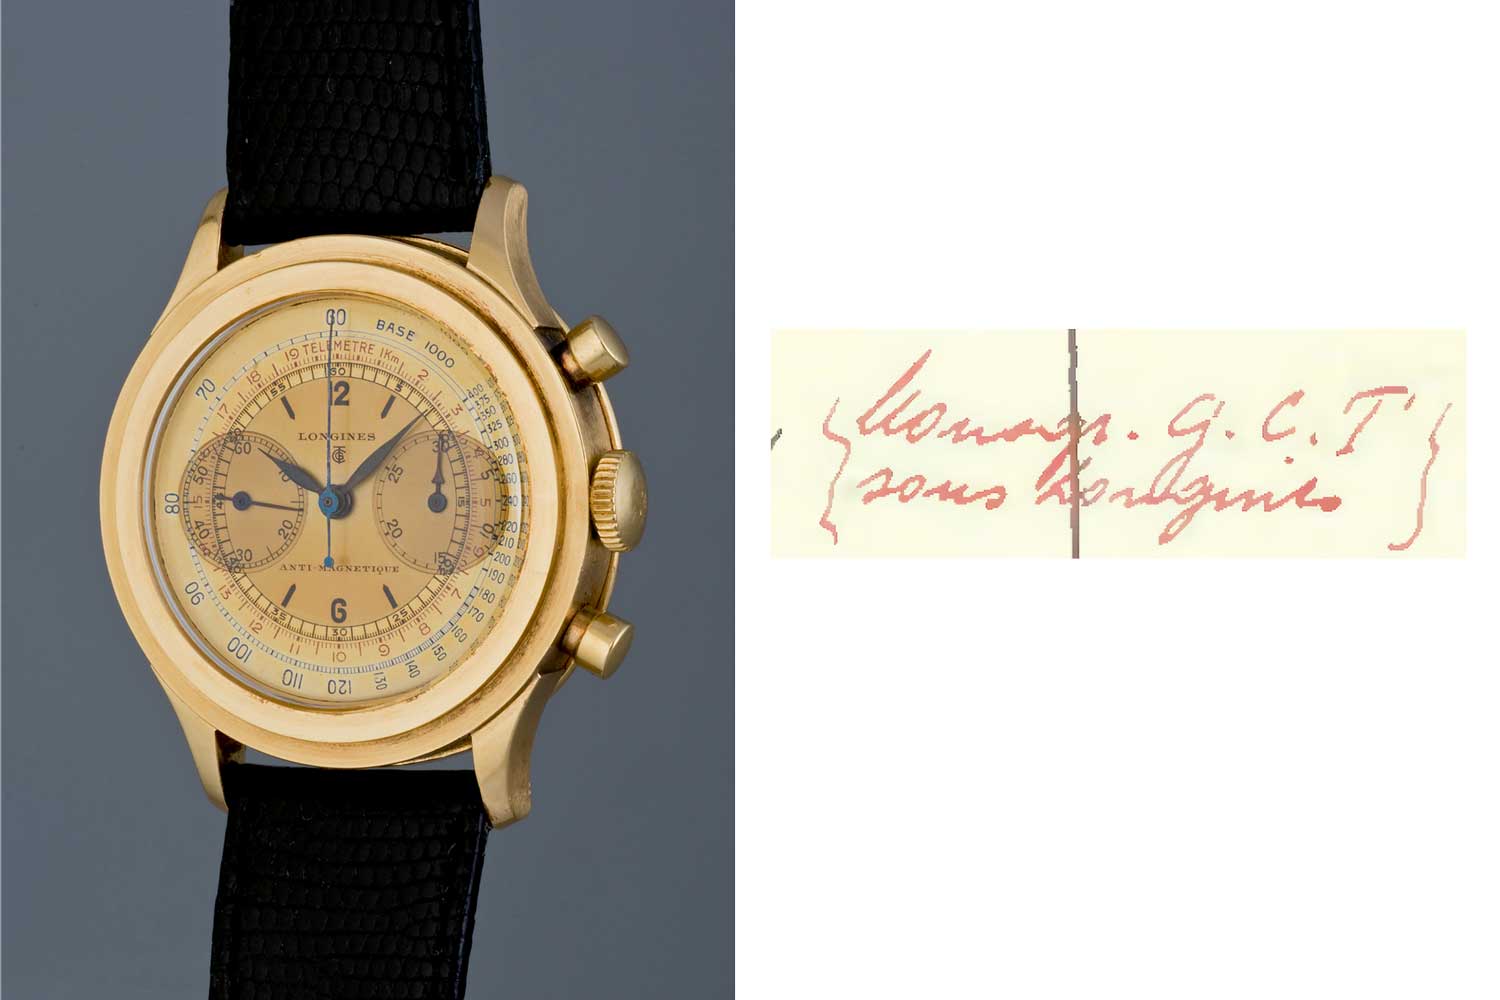 With the help of the Longines archives, the mysterious logo on the dial of the gold ref. 4270 was deduced to contain the abbreviation “G.C.T”. The same logo below the Longines font can be found in another time-only watch with corresponding records at the LEA. The meaning of the logo, however, remains elusive, but it most likely refers to a retailer.